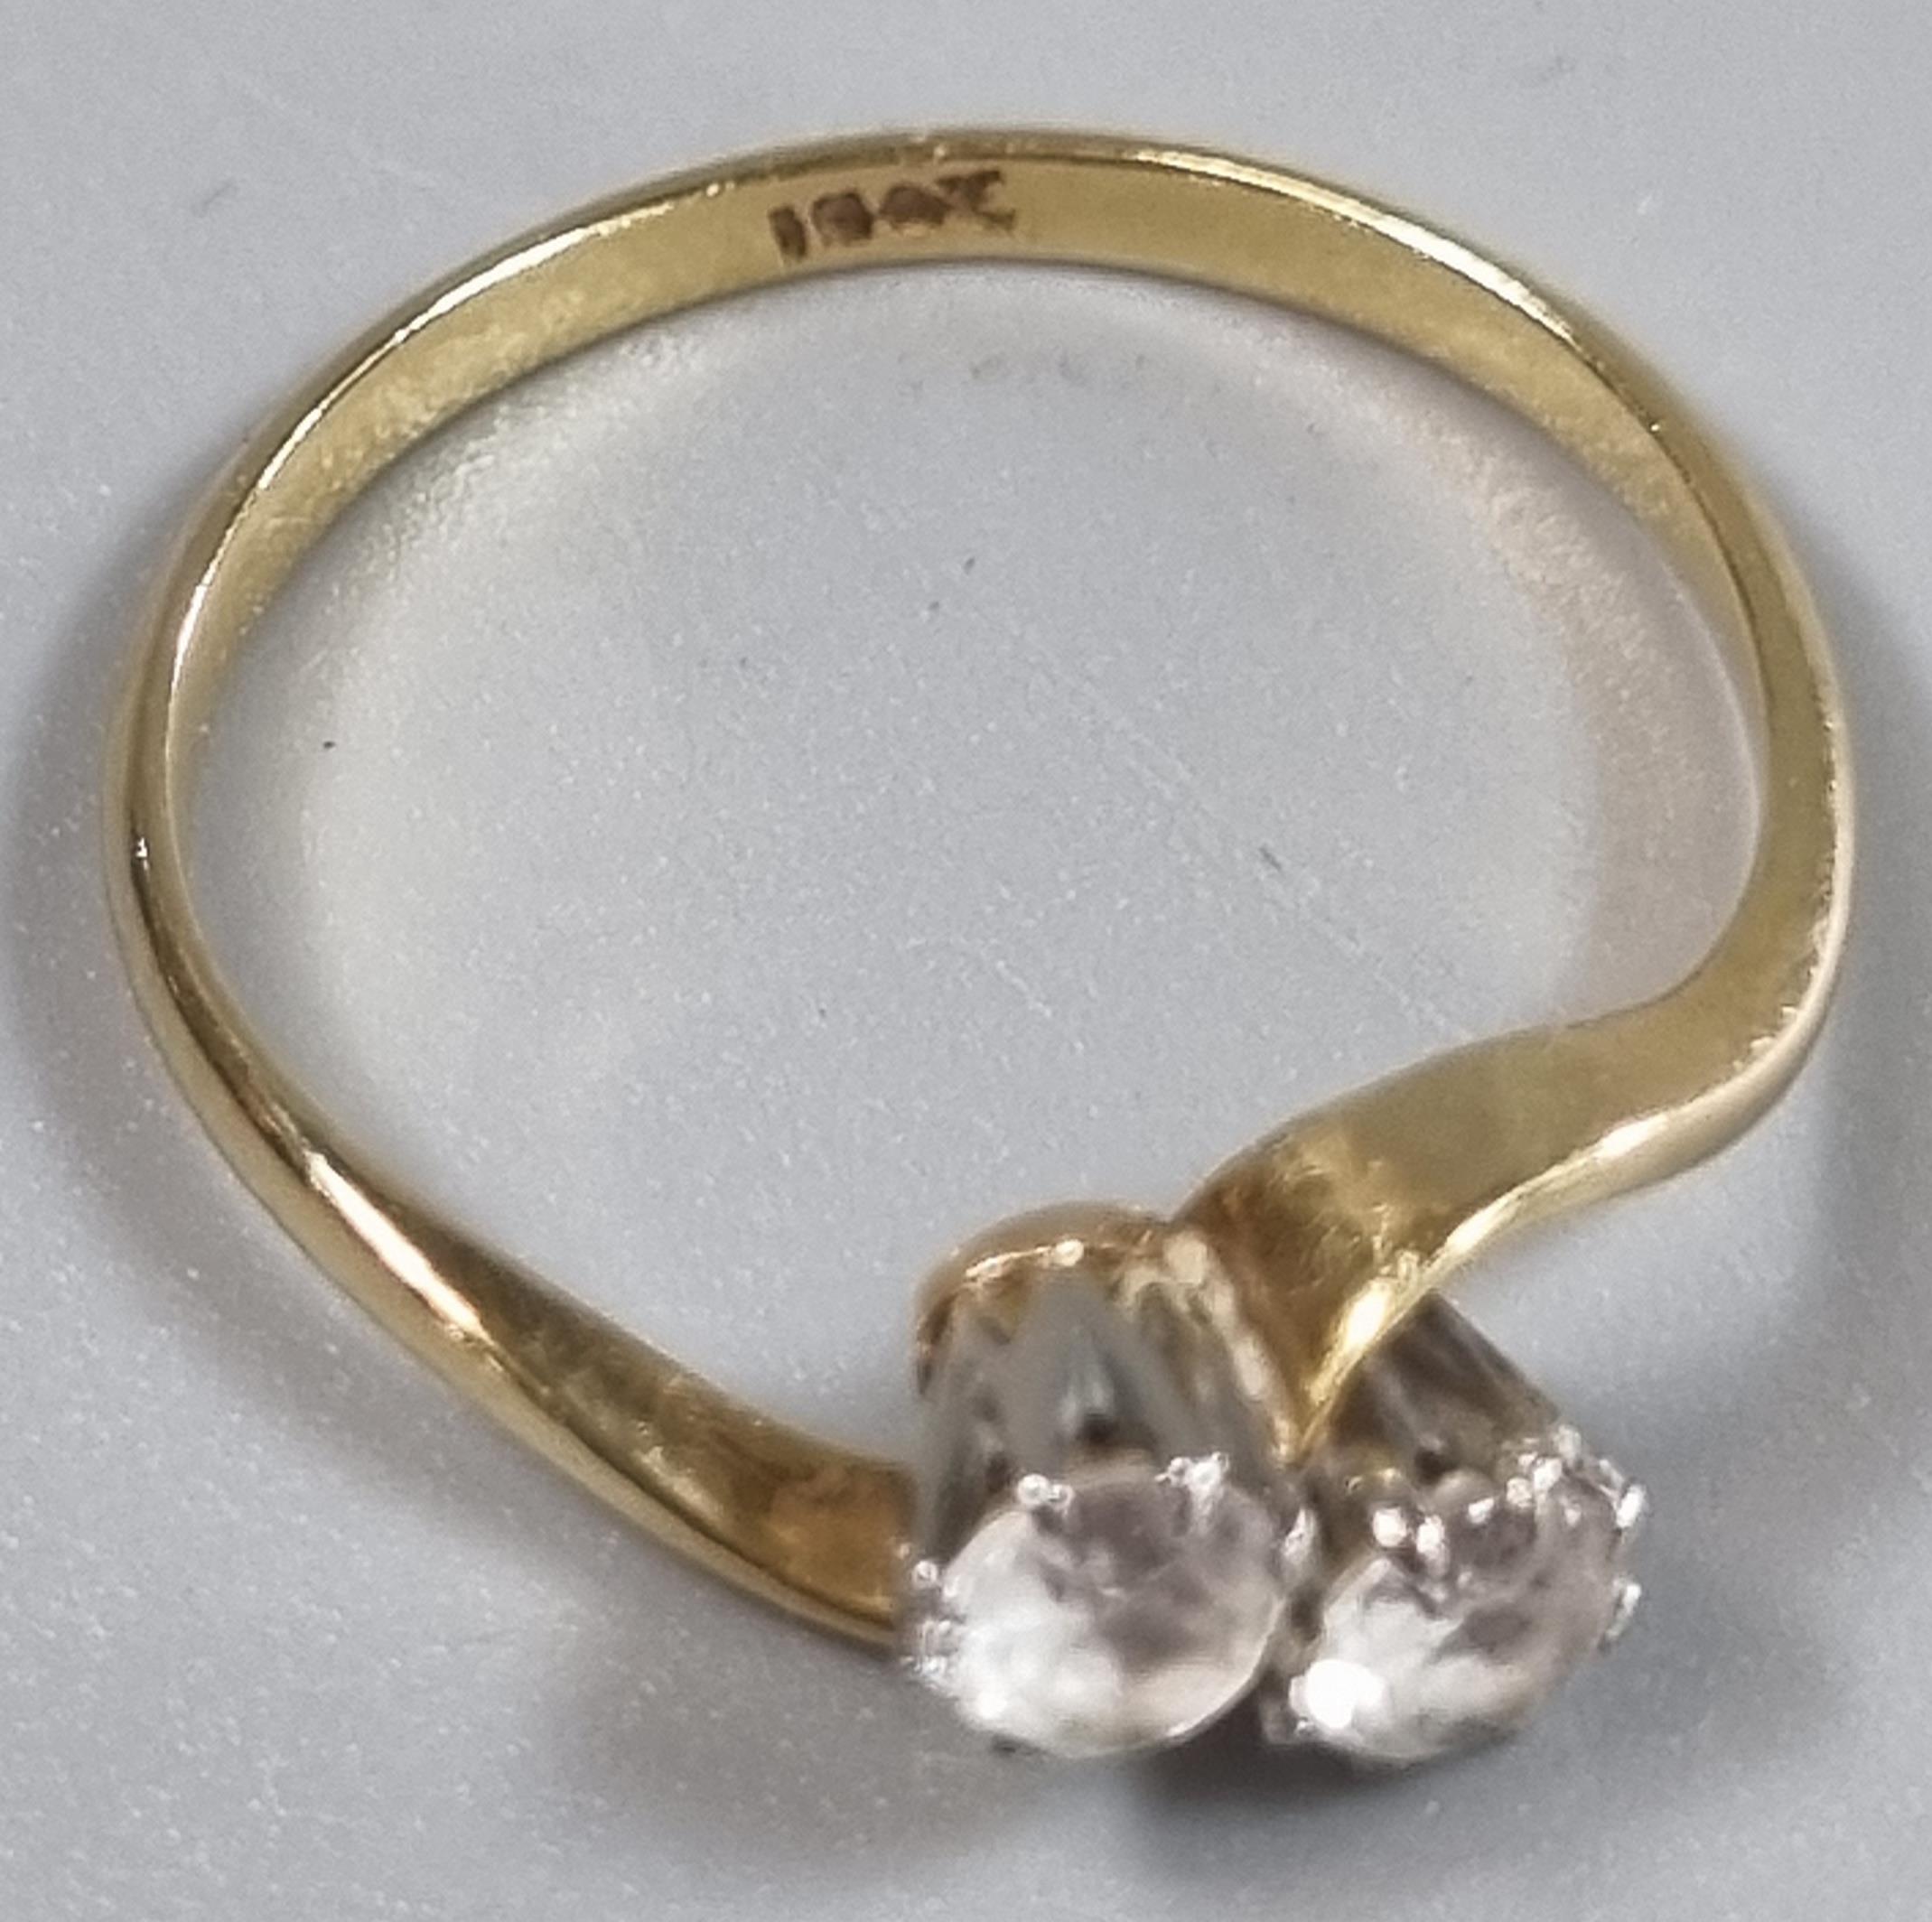 18ct gold twist shank two stone ring (do not test as diamonds). 1.8g approx. Size N. (B.P. 21% + - Image 3 of 4